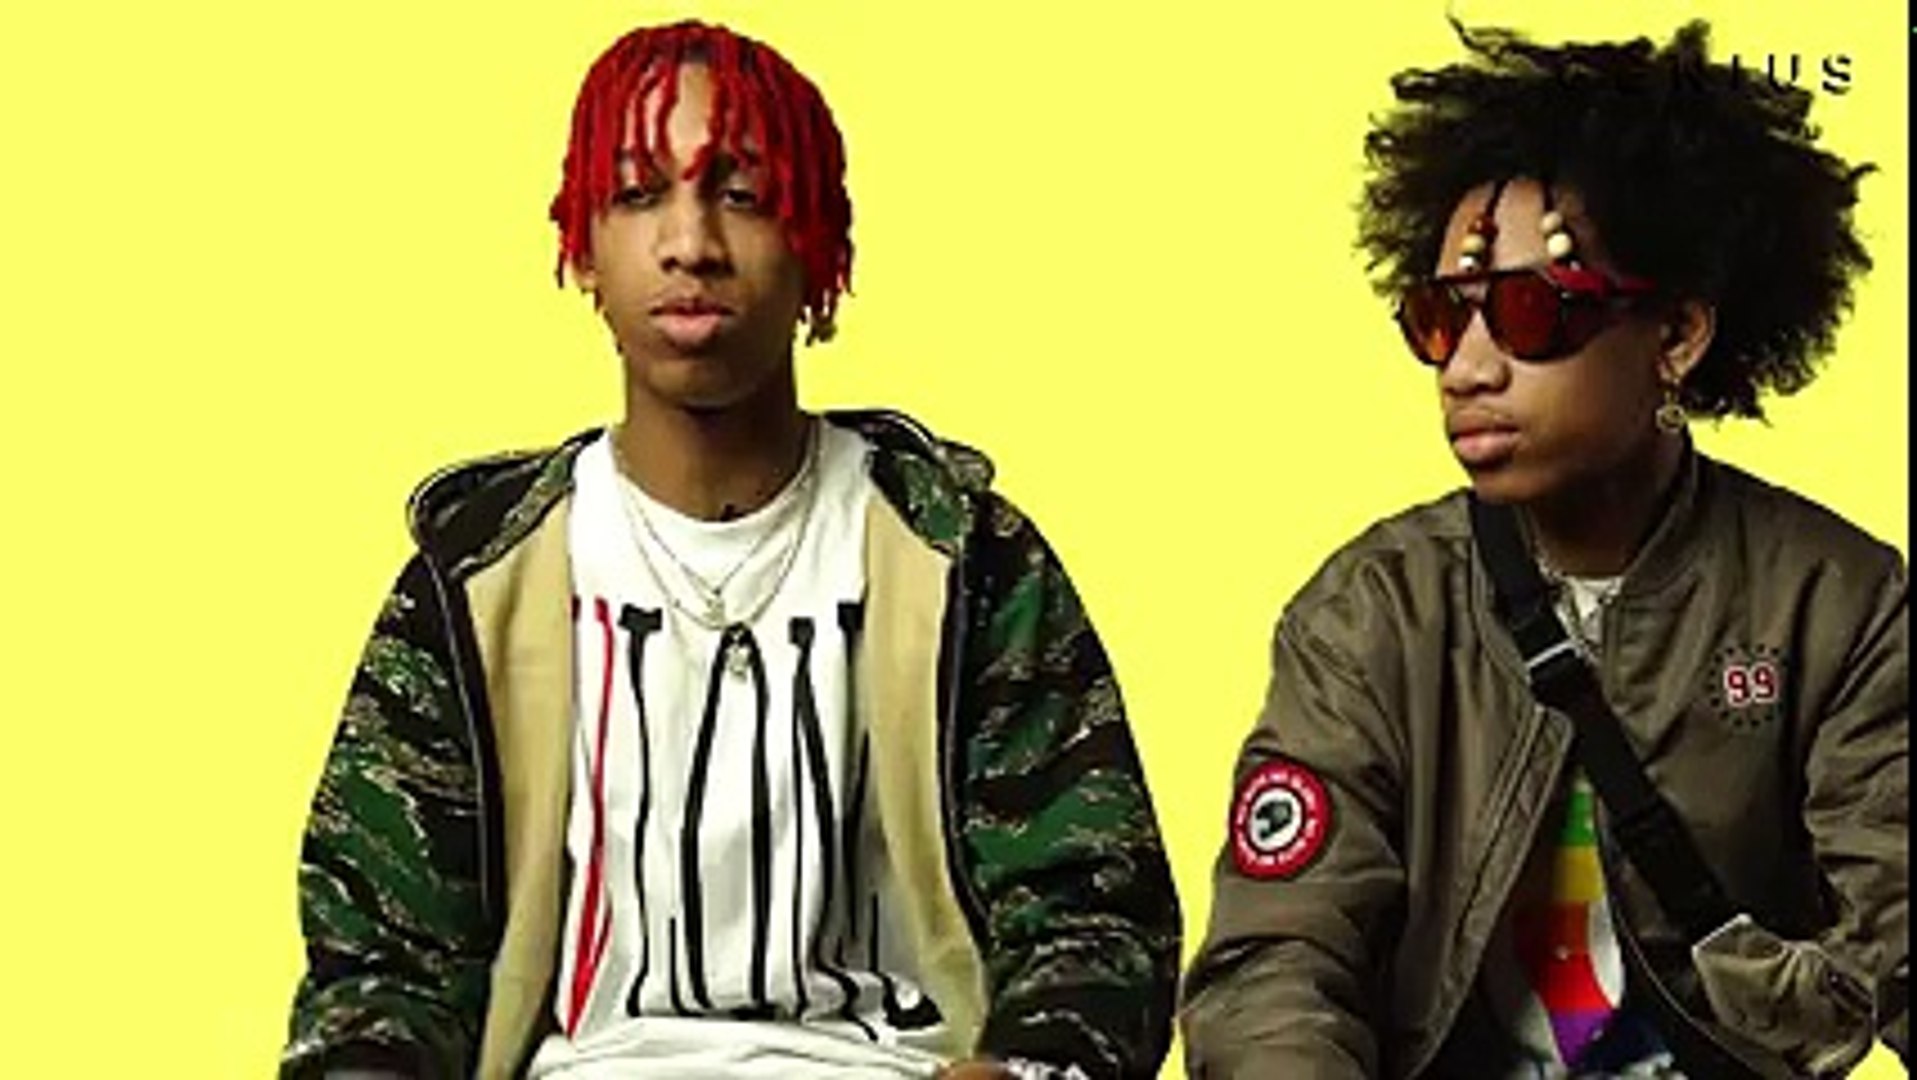 Ayo & Teo “Rolex“ Official Lyrics & Meaning - Vidéo Dailymotion